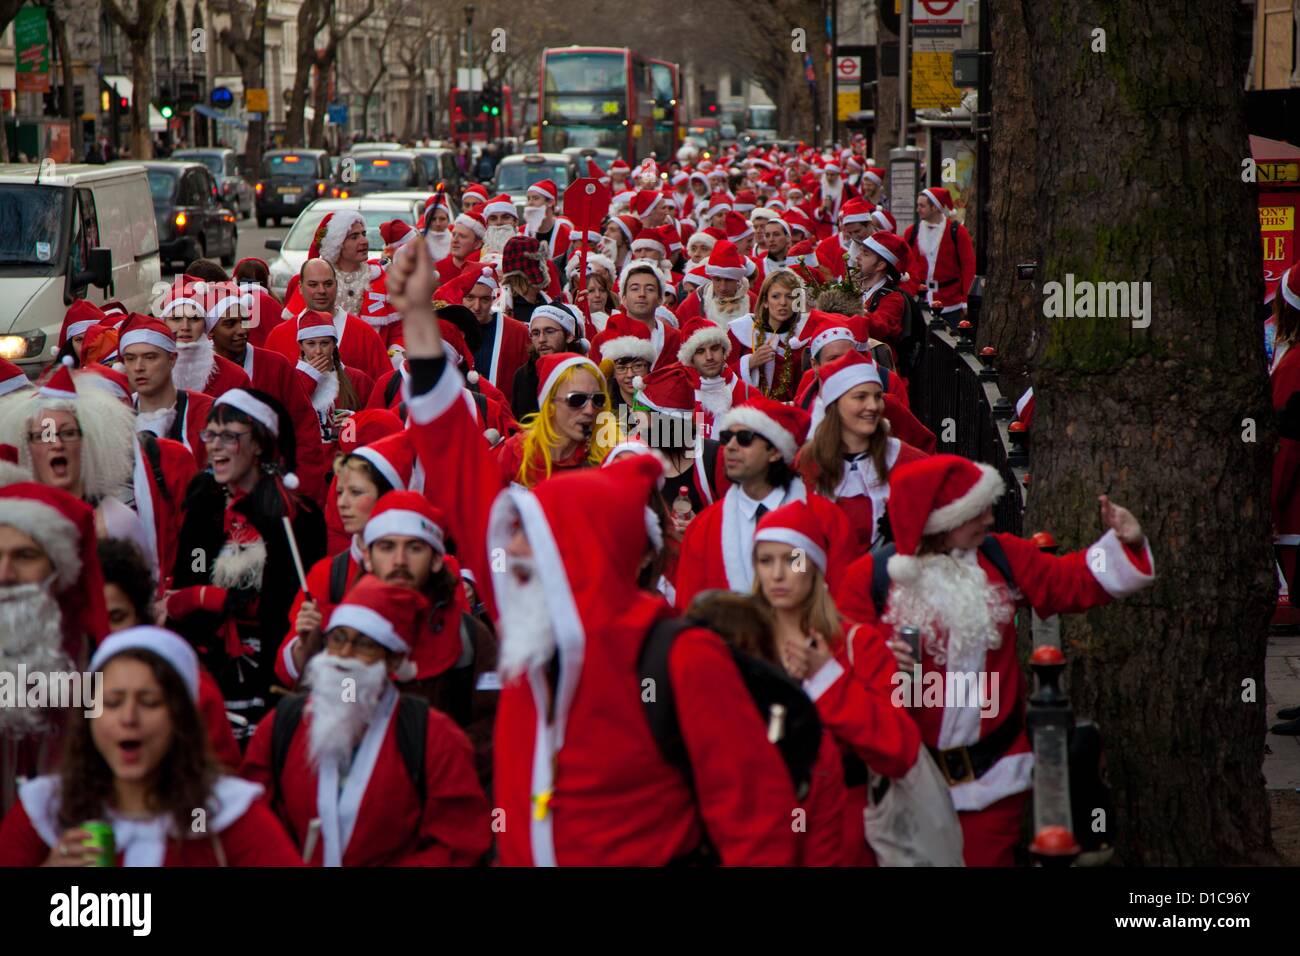 London, UK. 15th of December 2012 Annual Santa Con gathering hits Central London. Every year in December thousands of people dress up as Santa for the annual get together of Santa Con, they walk from various landmarks in London before ending in Trafalgar Square. Credit:  nelson pereira / Alamy Live News Stock Photo